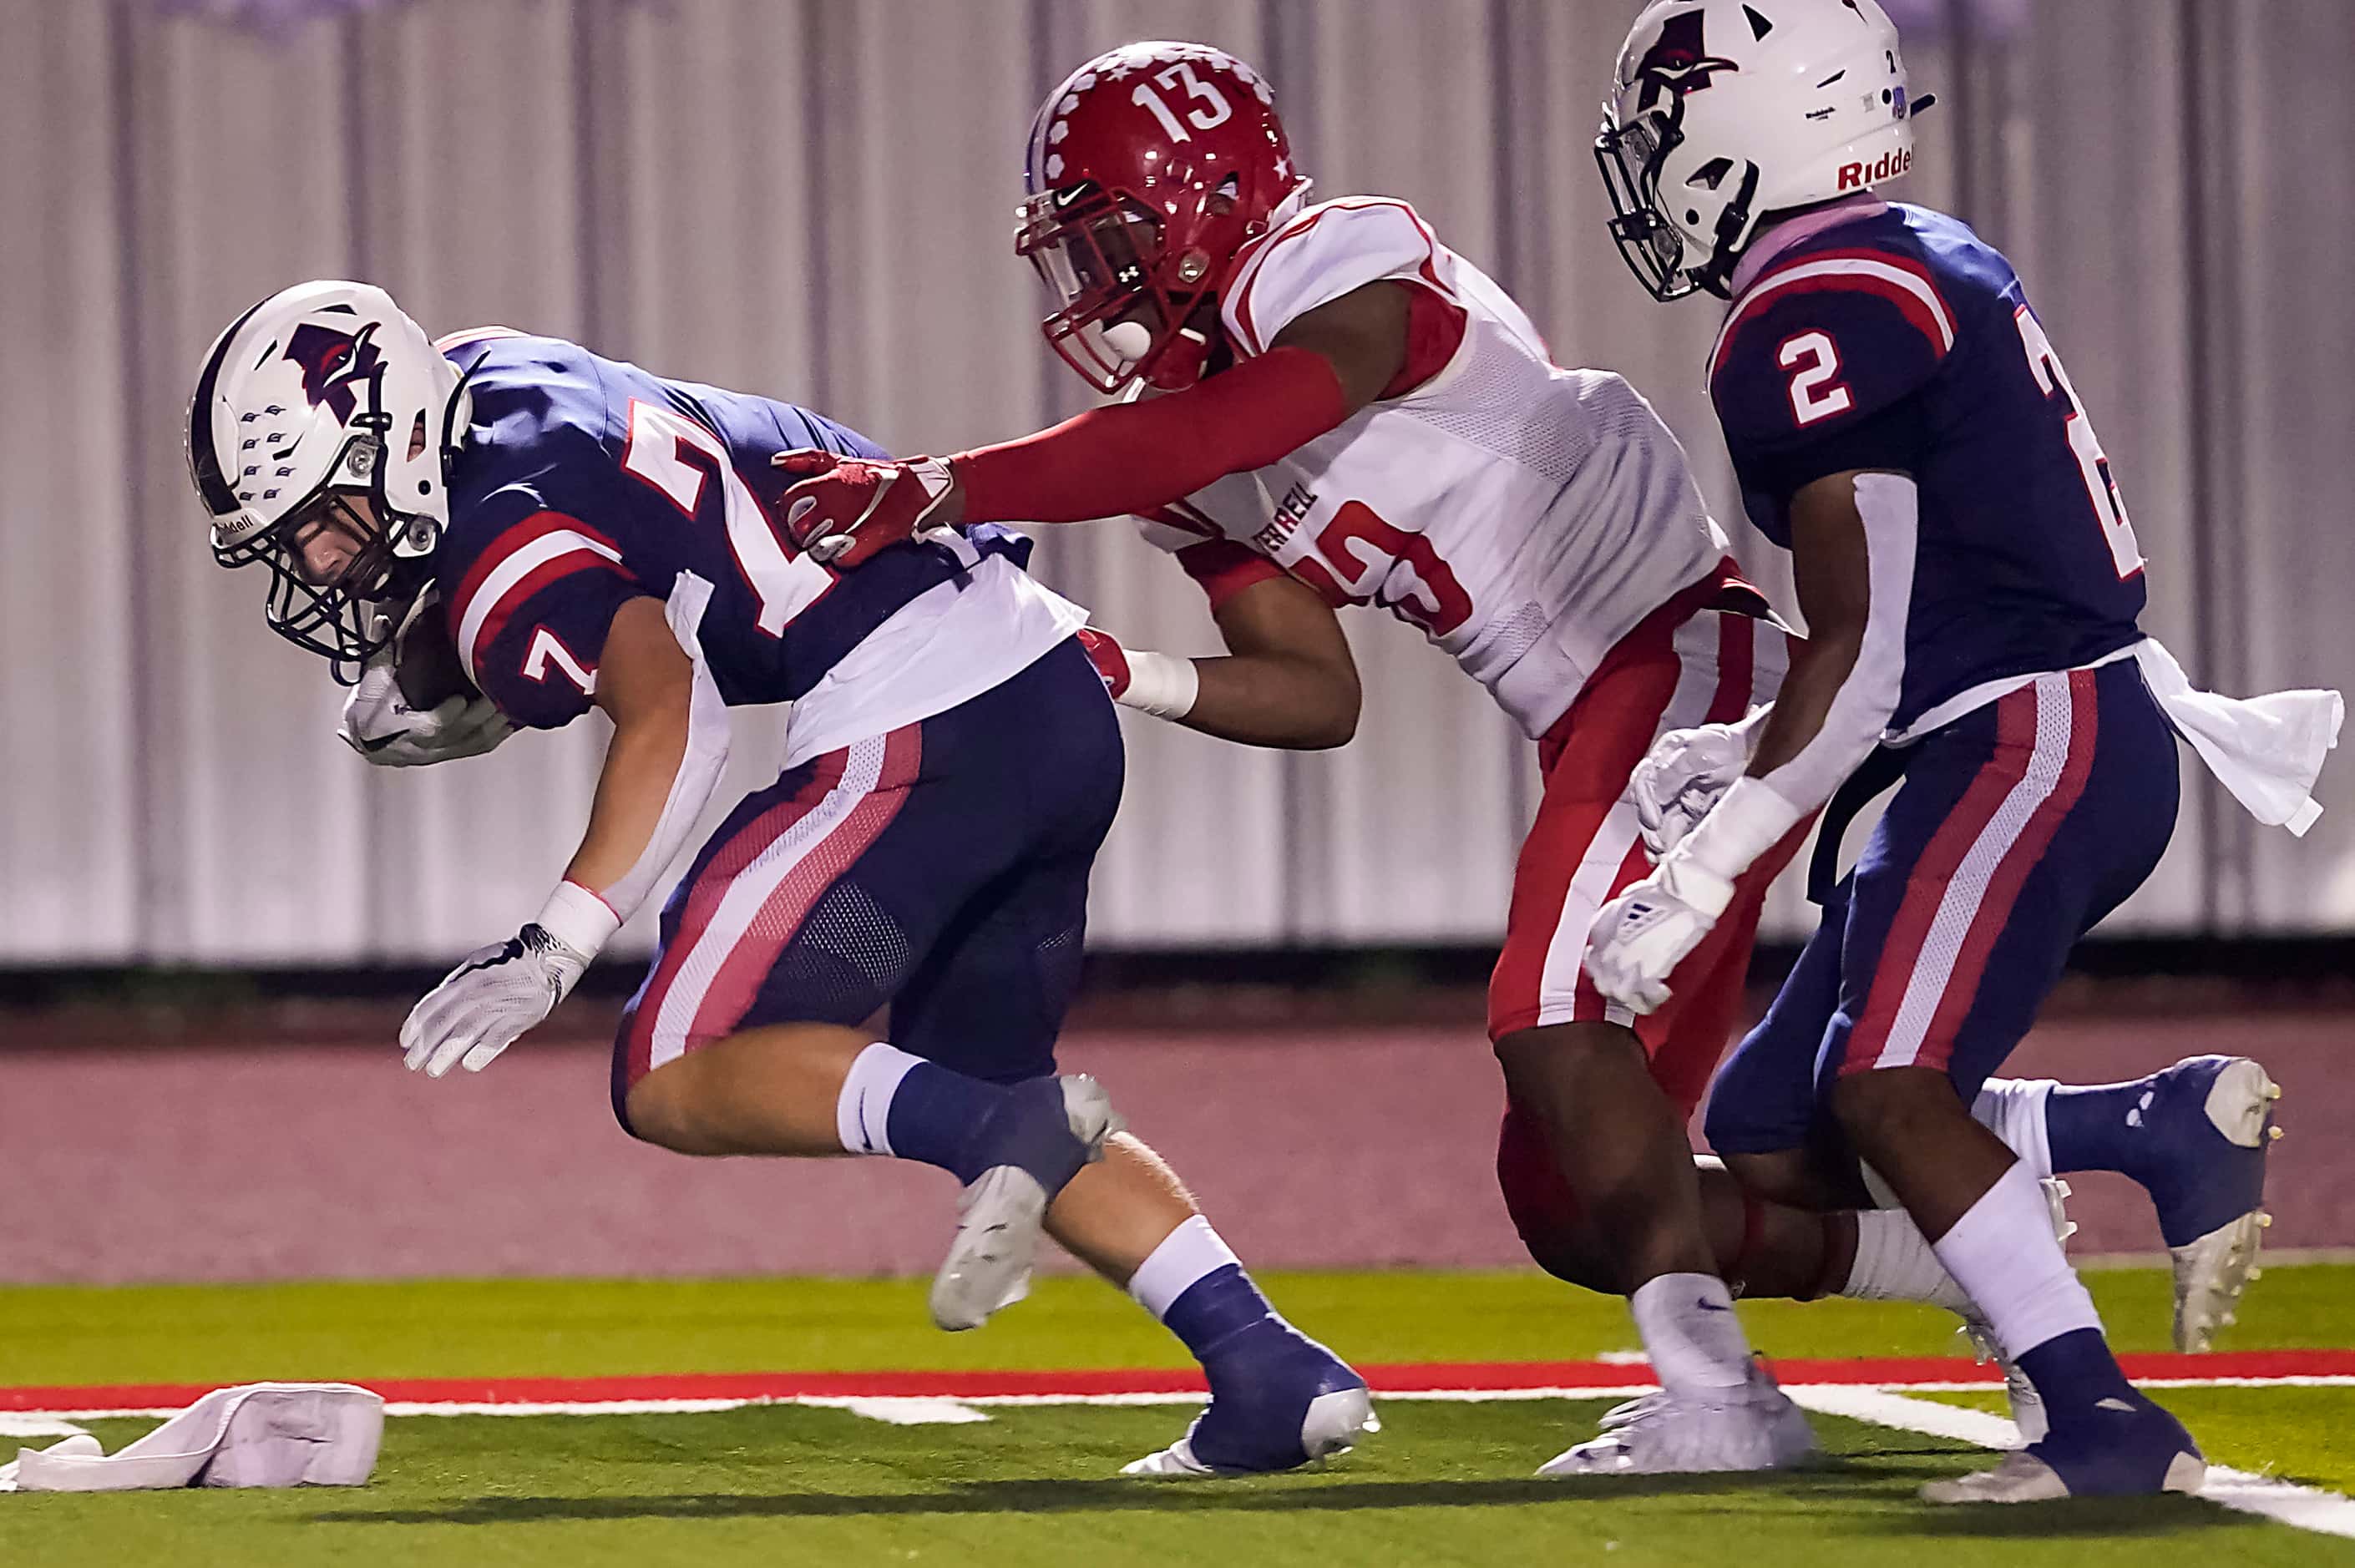 Aubrey running back Jacob Holder (7) picks up a first down against Terrell defensive back...